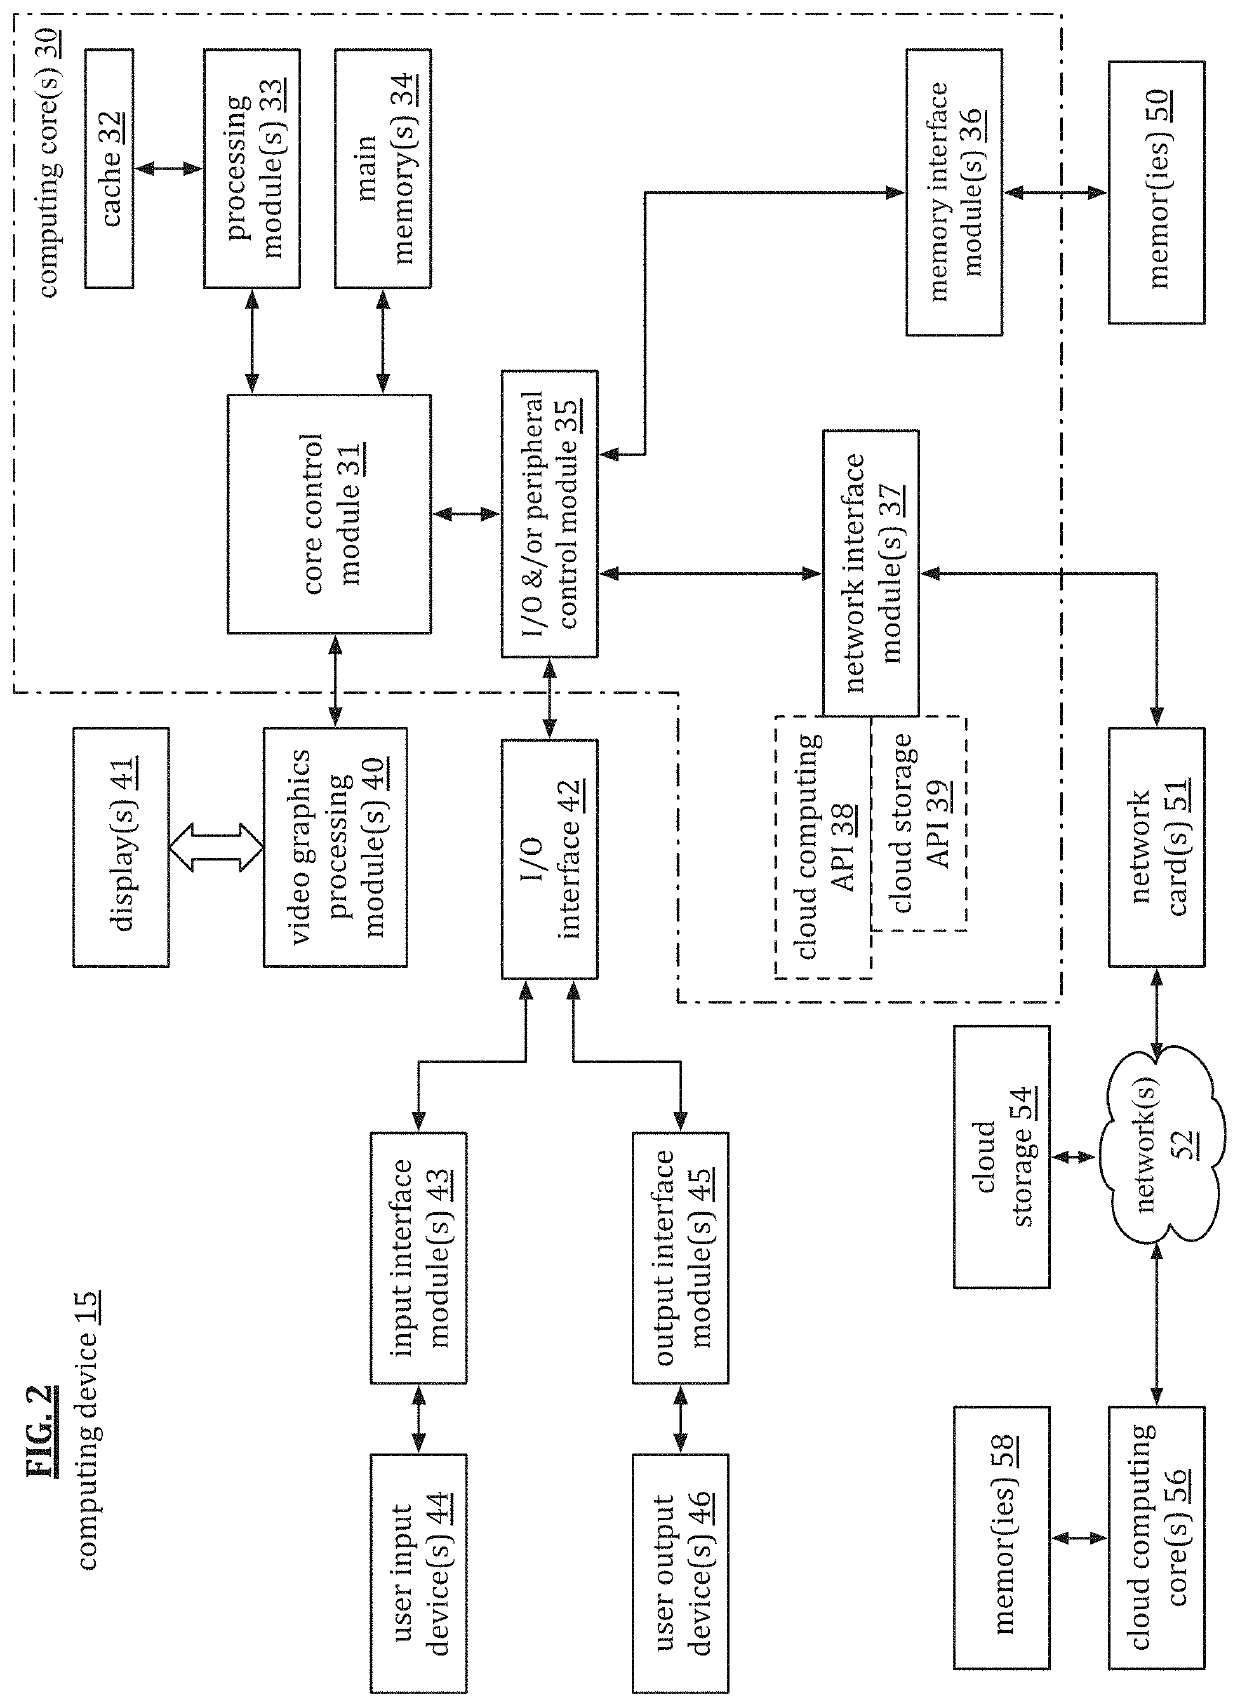 Securely processing shareable data in a data communication network